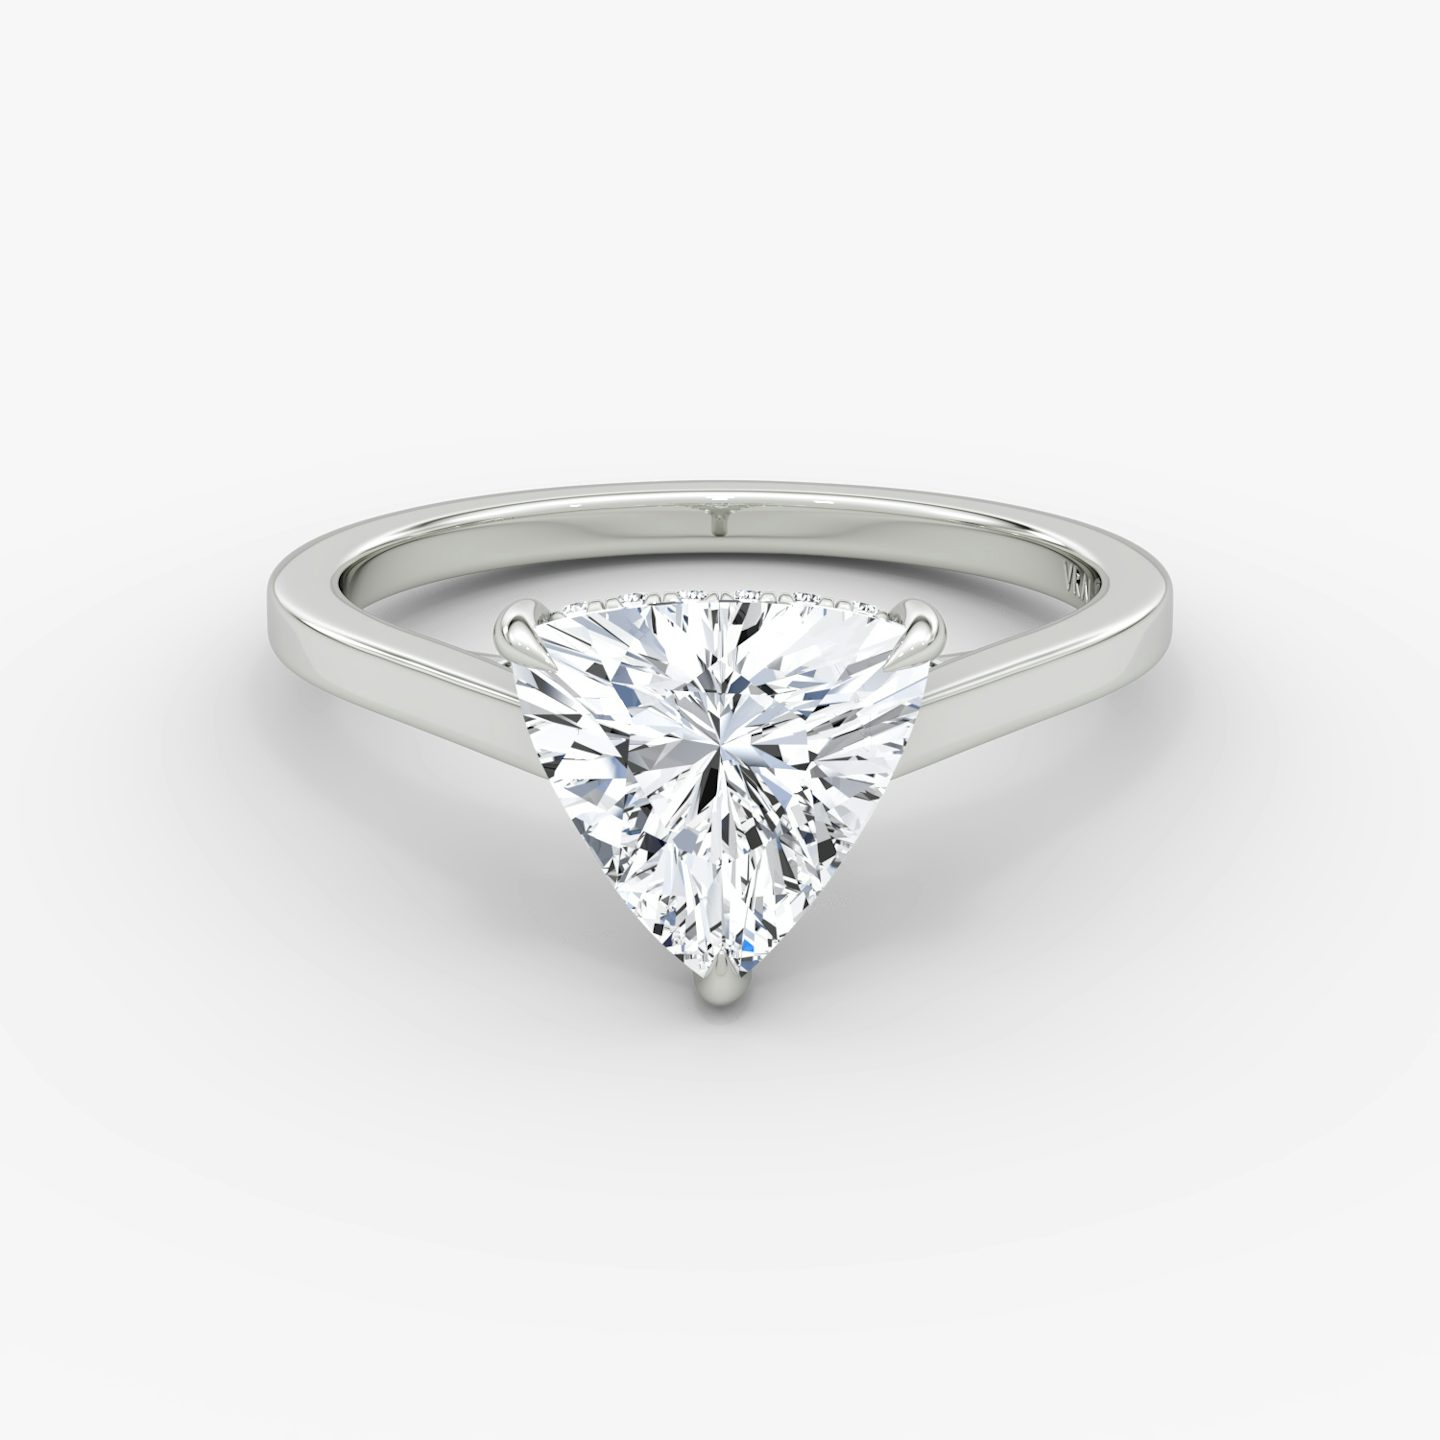 undefined | Trillion | 18k | Or blanc | bandAccent: Simple | diamondOrientation: vertical | caratWeight: other